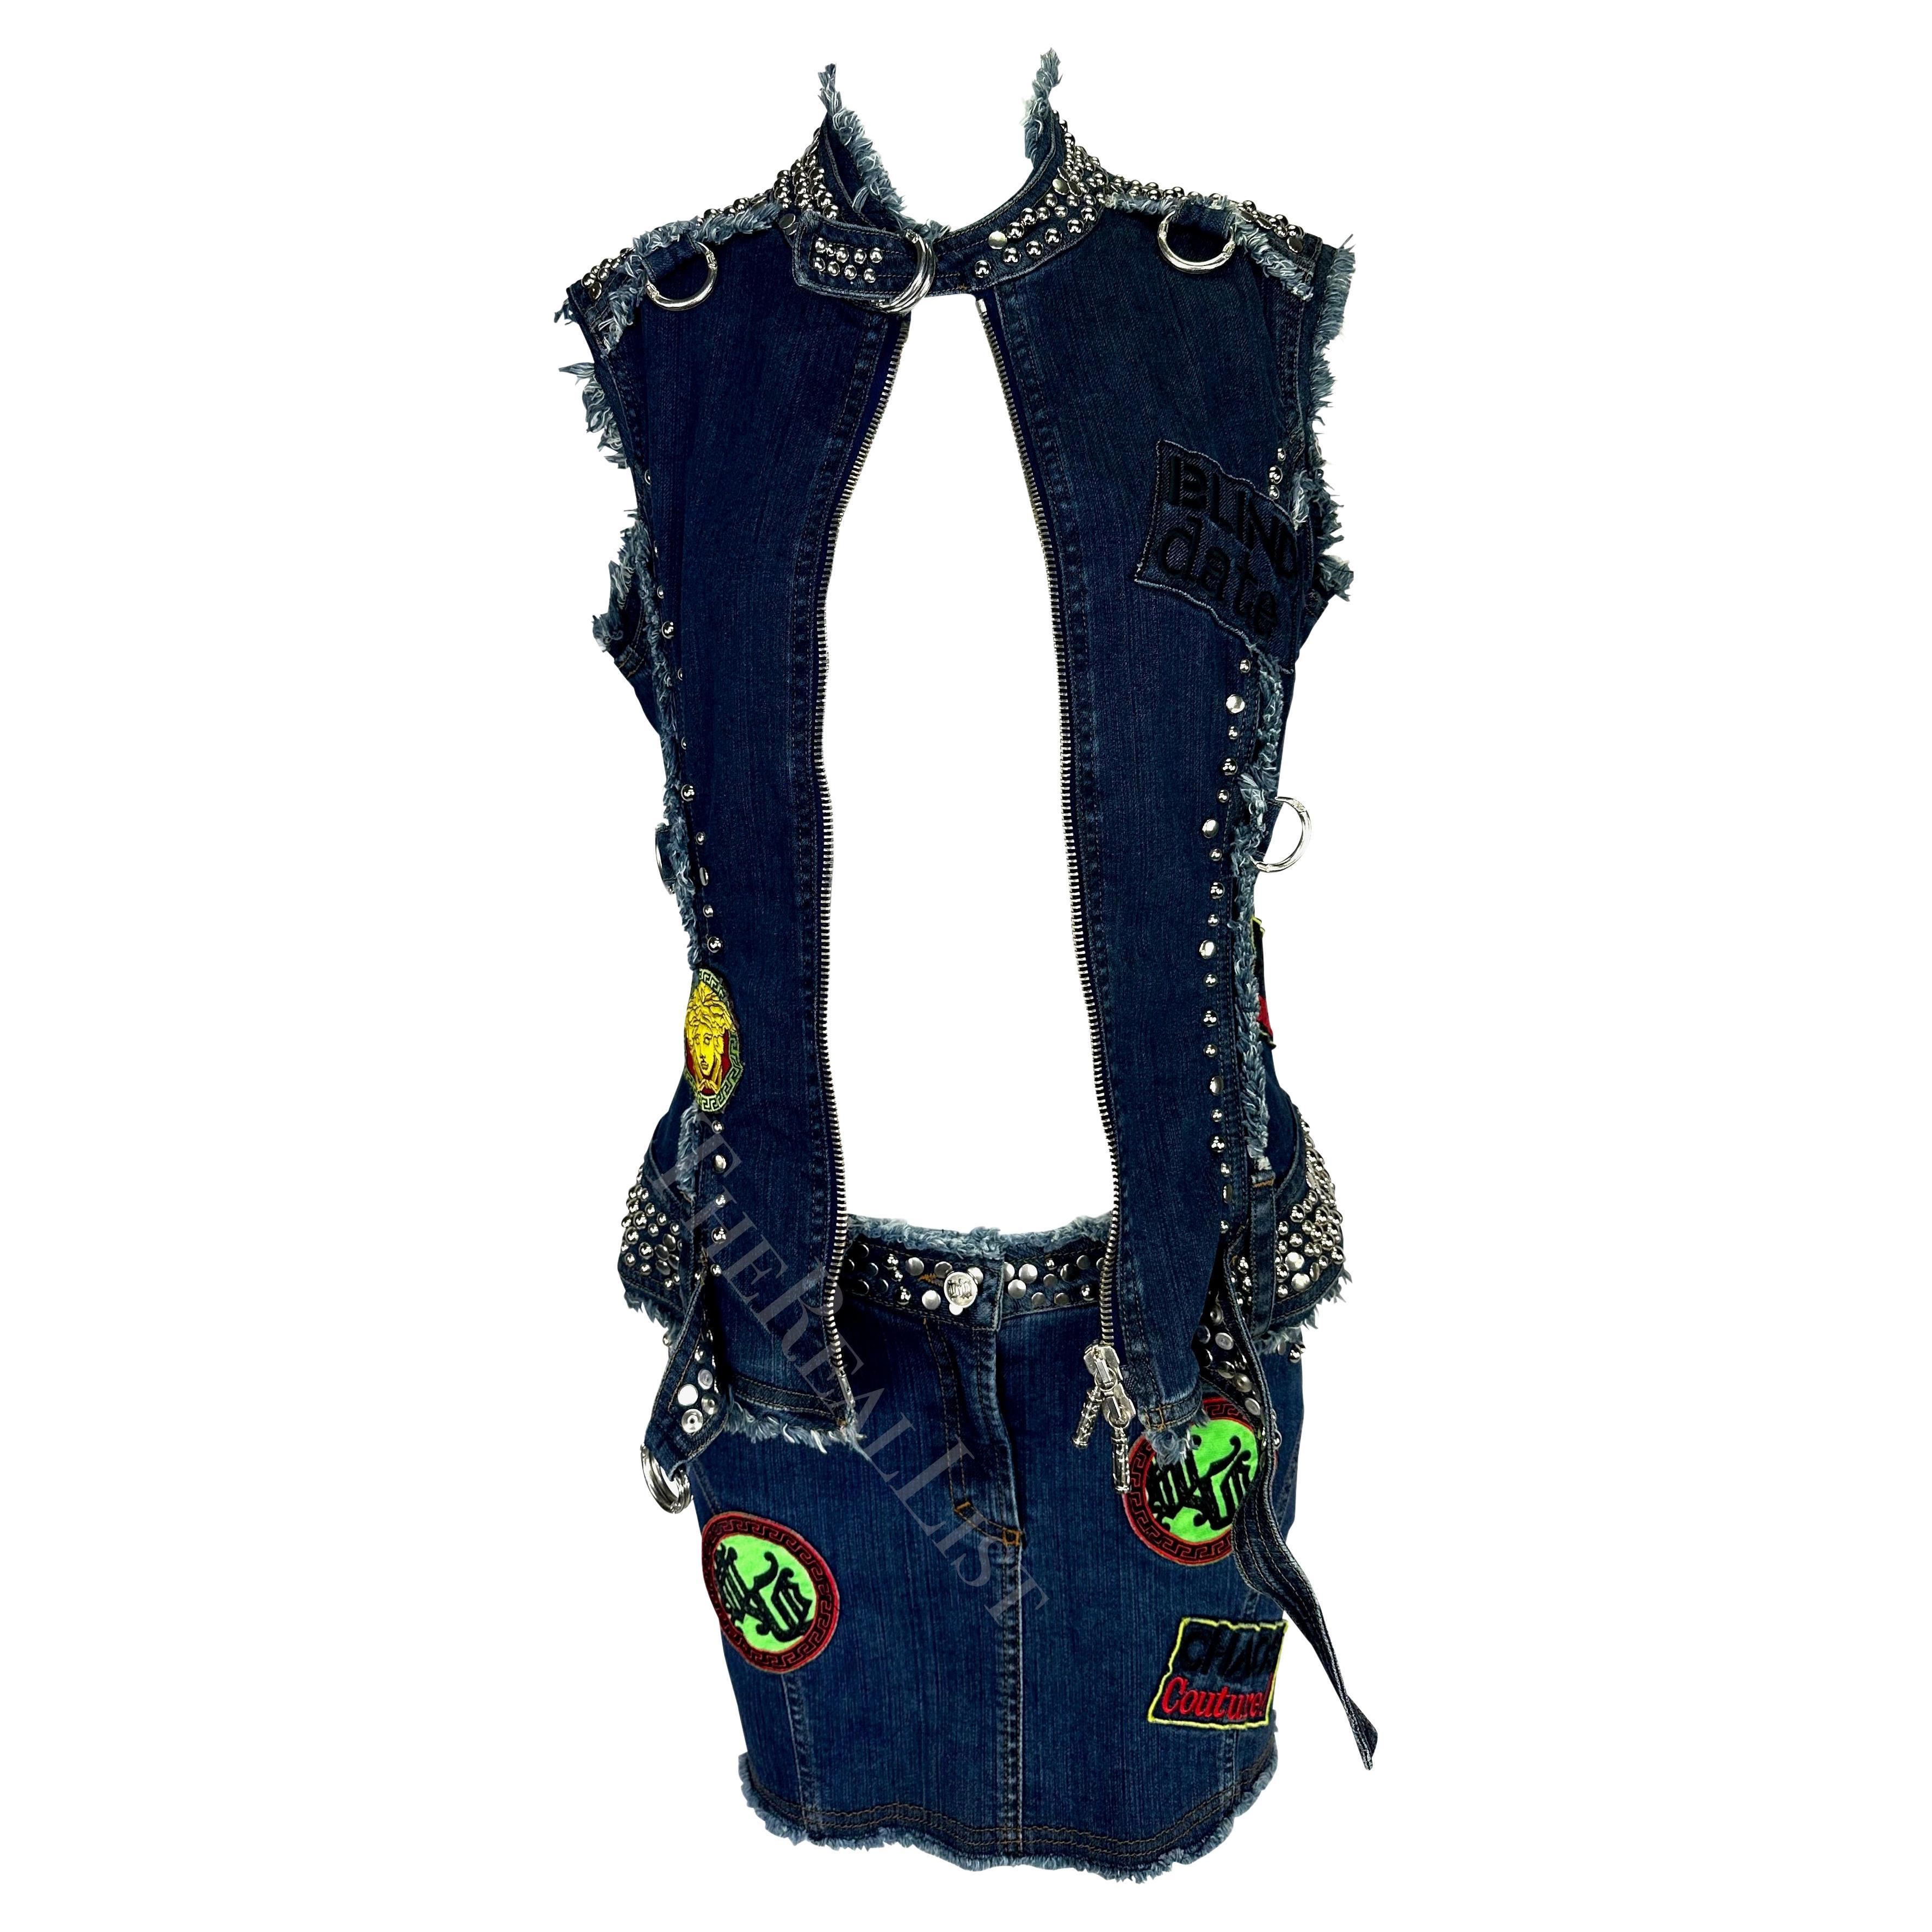 S/S 2005 Versace by Donatella Chaos Couture Studded Denim Patch Vest Skirt Set For Sale 2